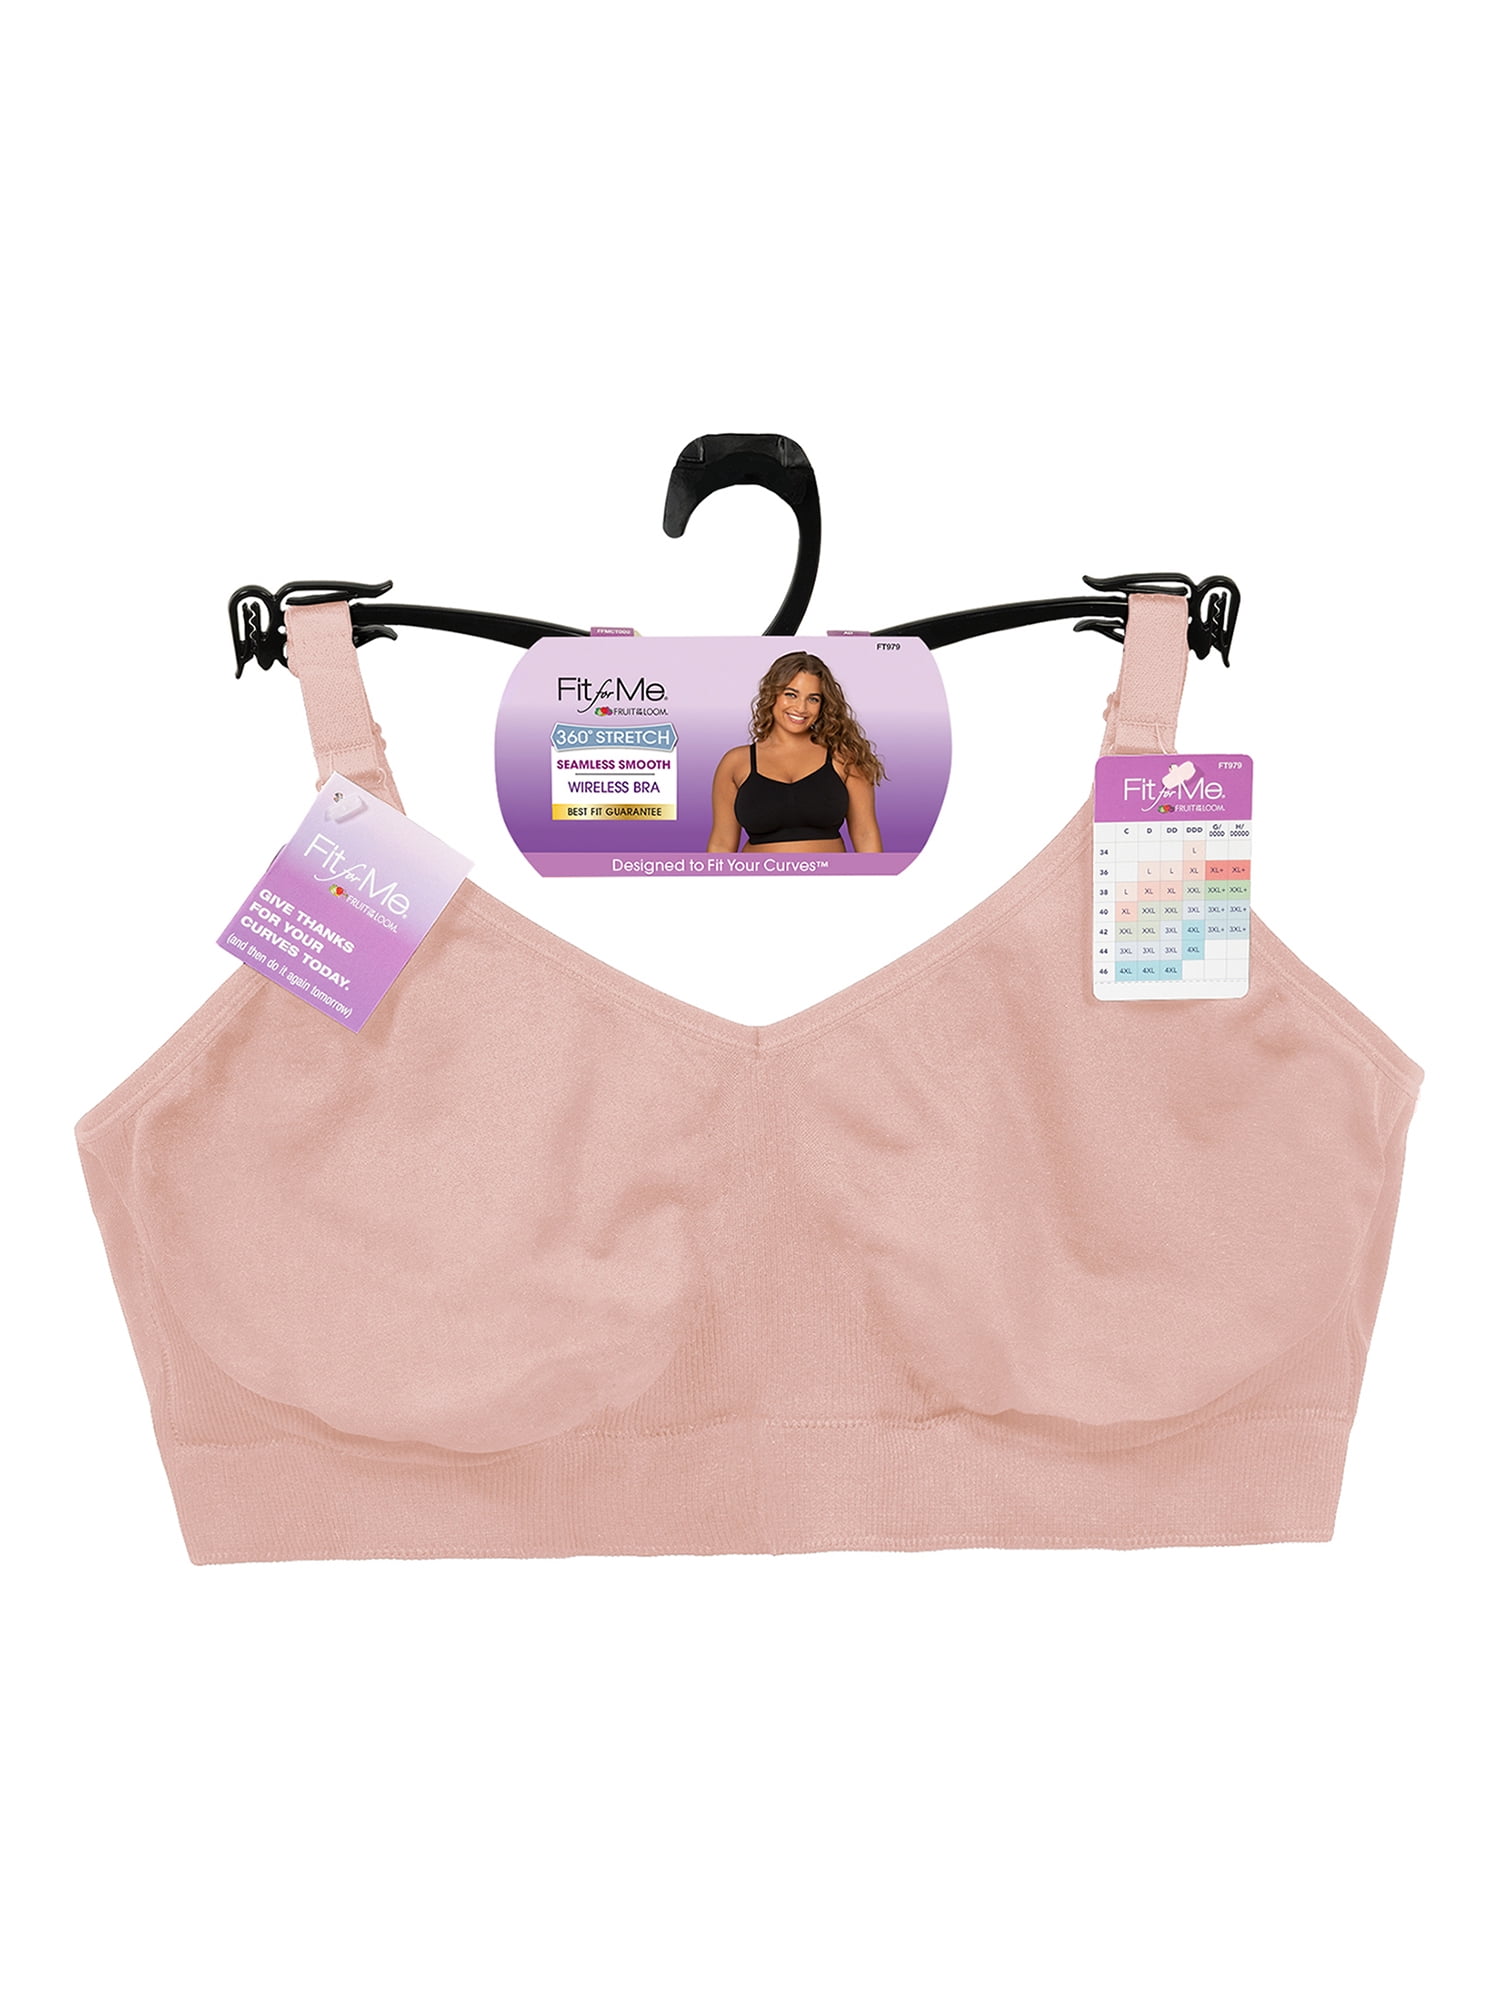 Lorelm Combed Cotton Bra Without Wire - Trendyol